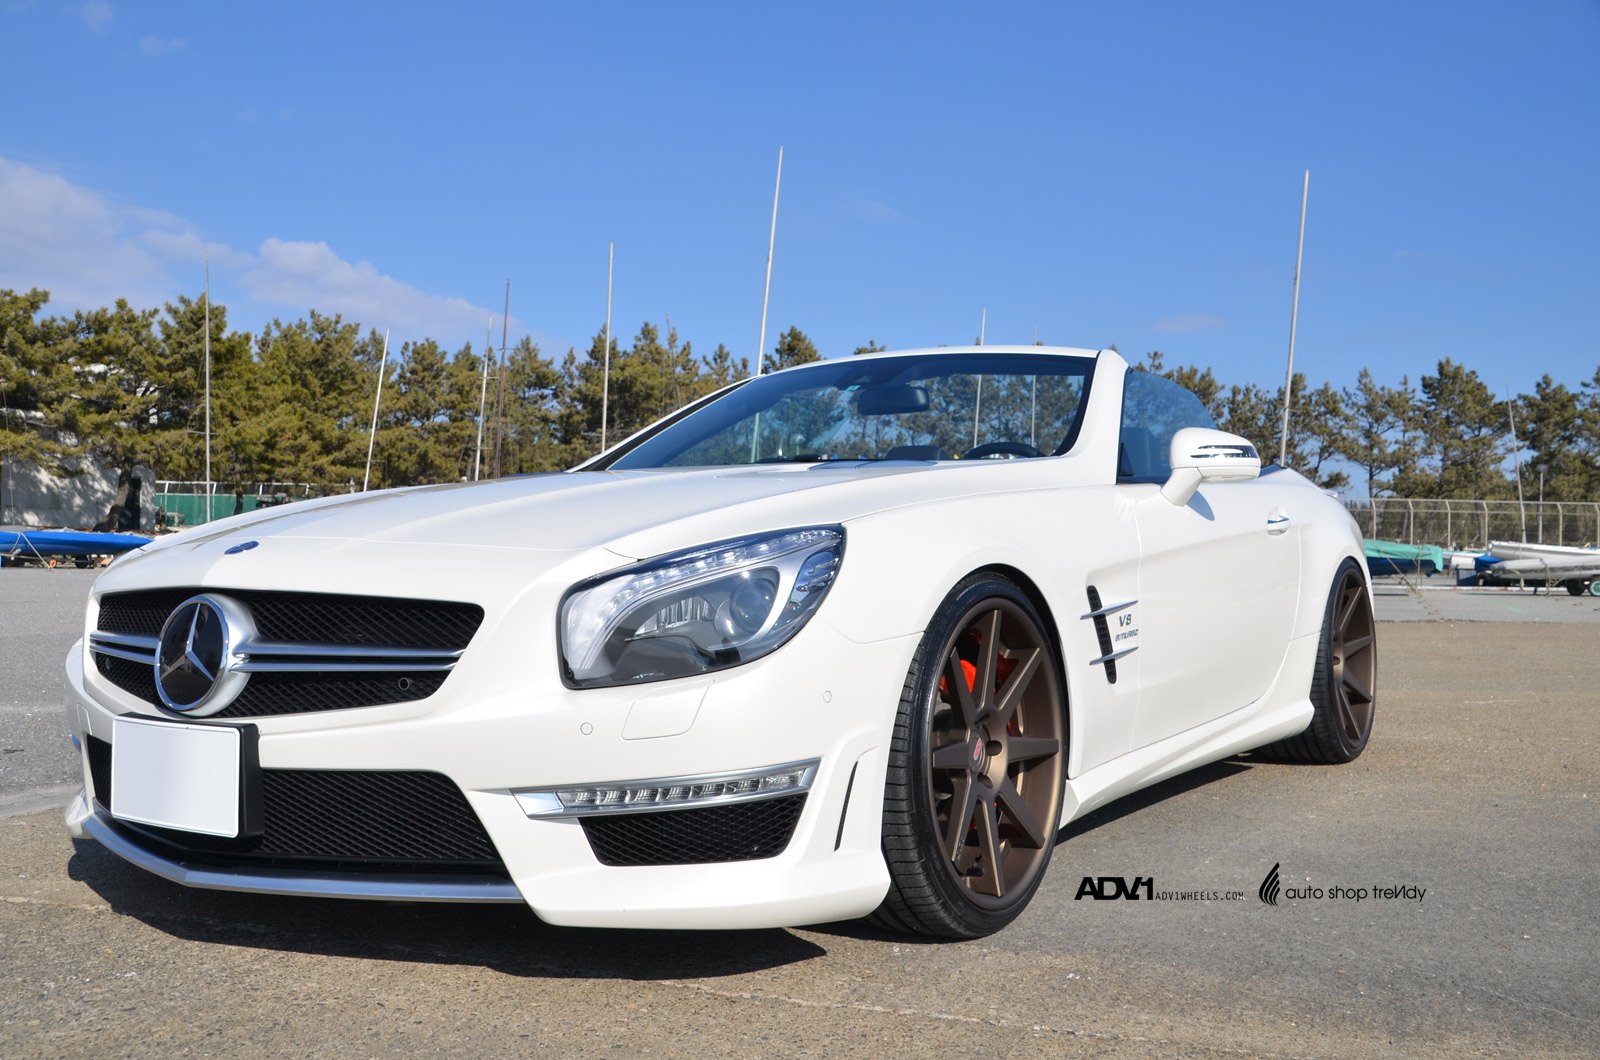 Aftermarket Front Bumper on White Mercedes SL Class - Photo by ADV.1